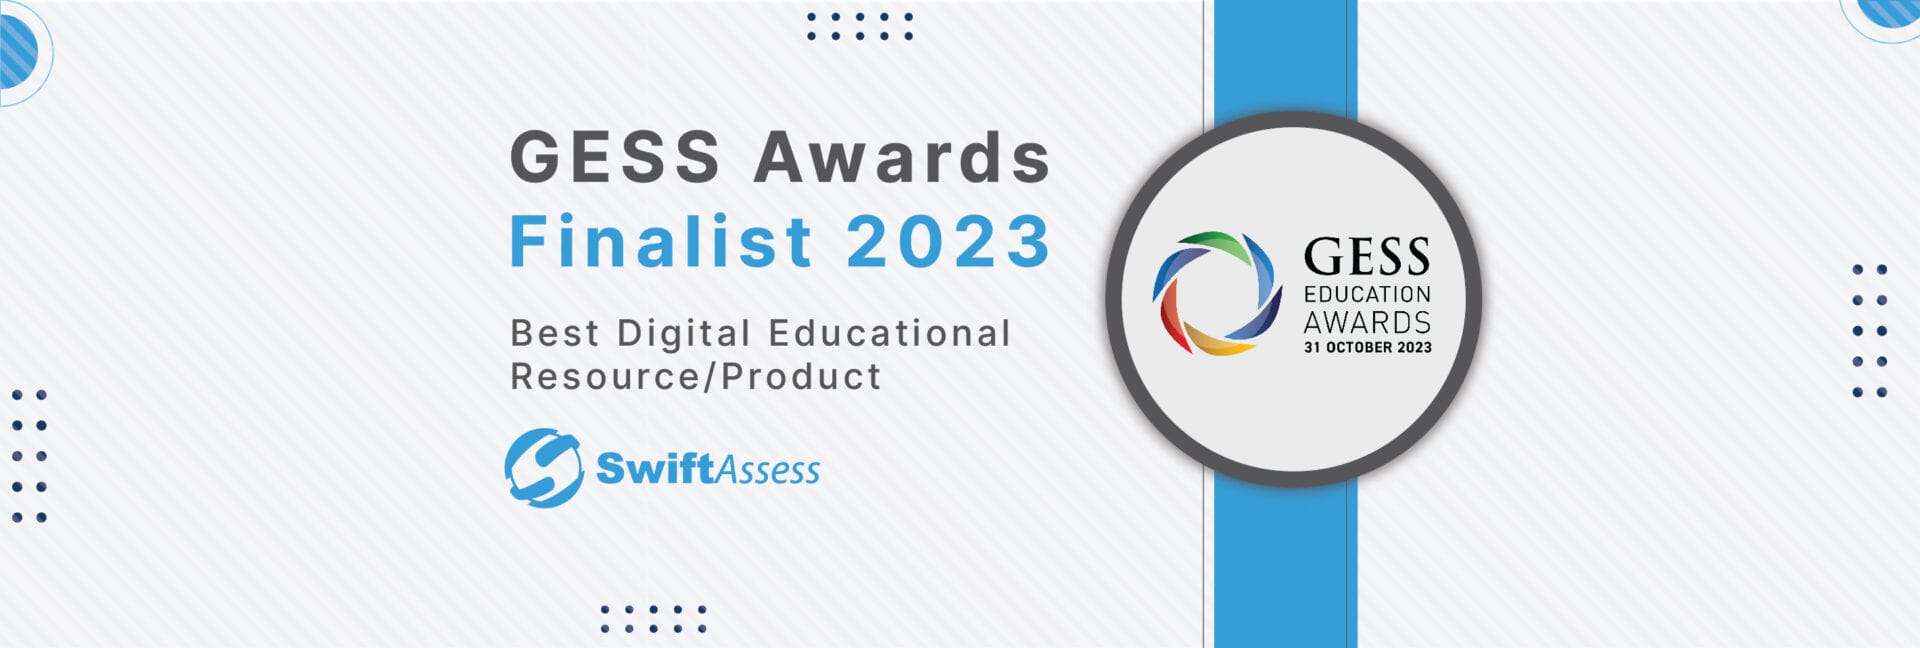 GamaLearn Shortlisted for GESS Education Awards 2023!